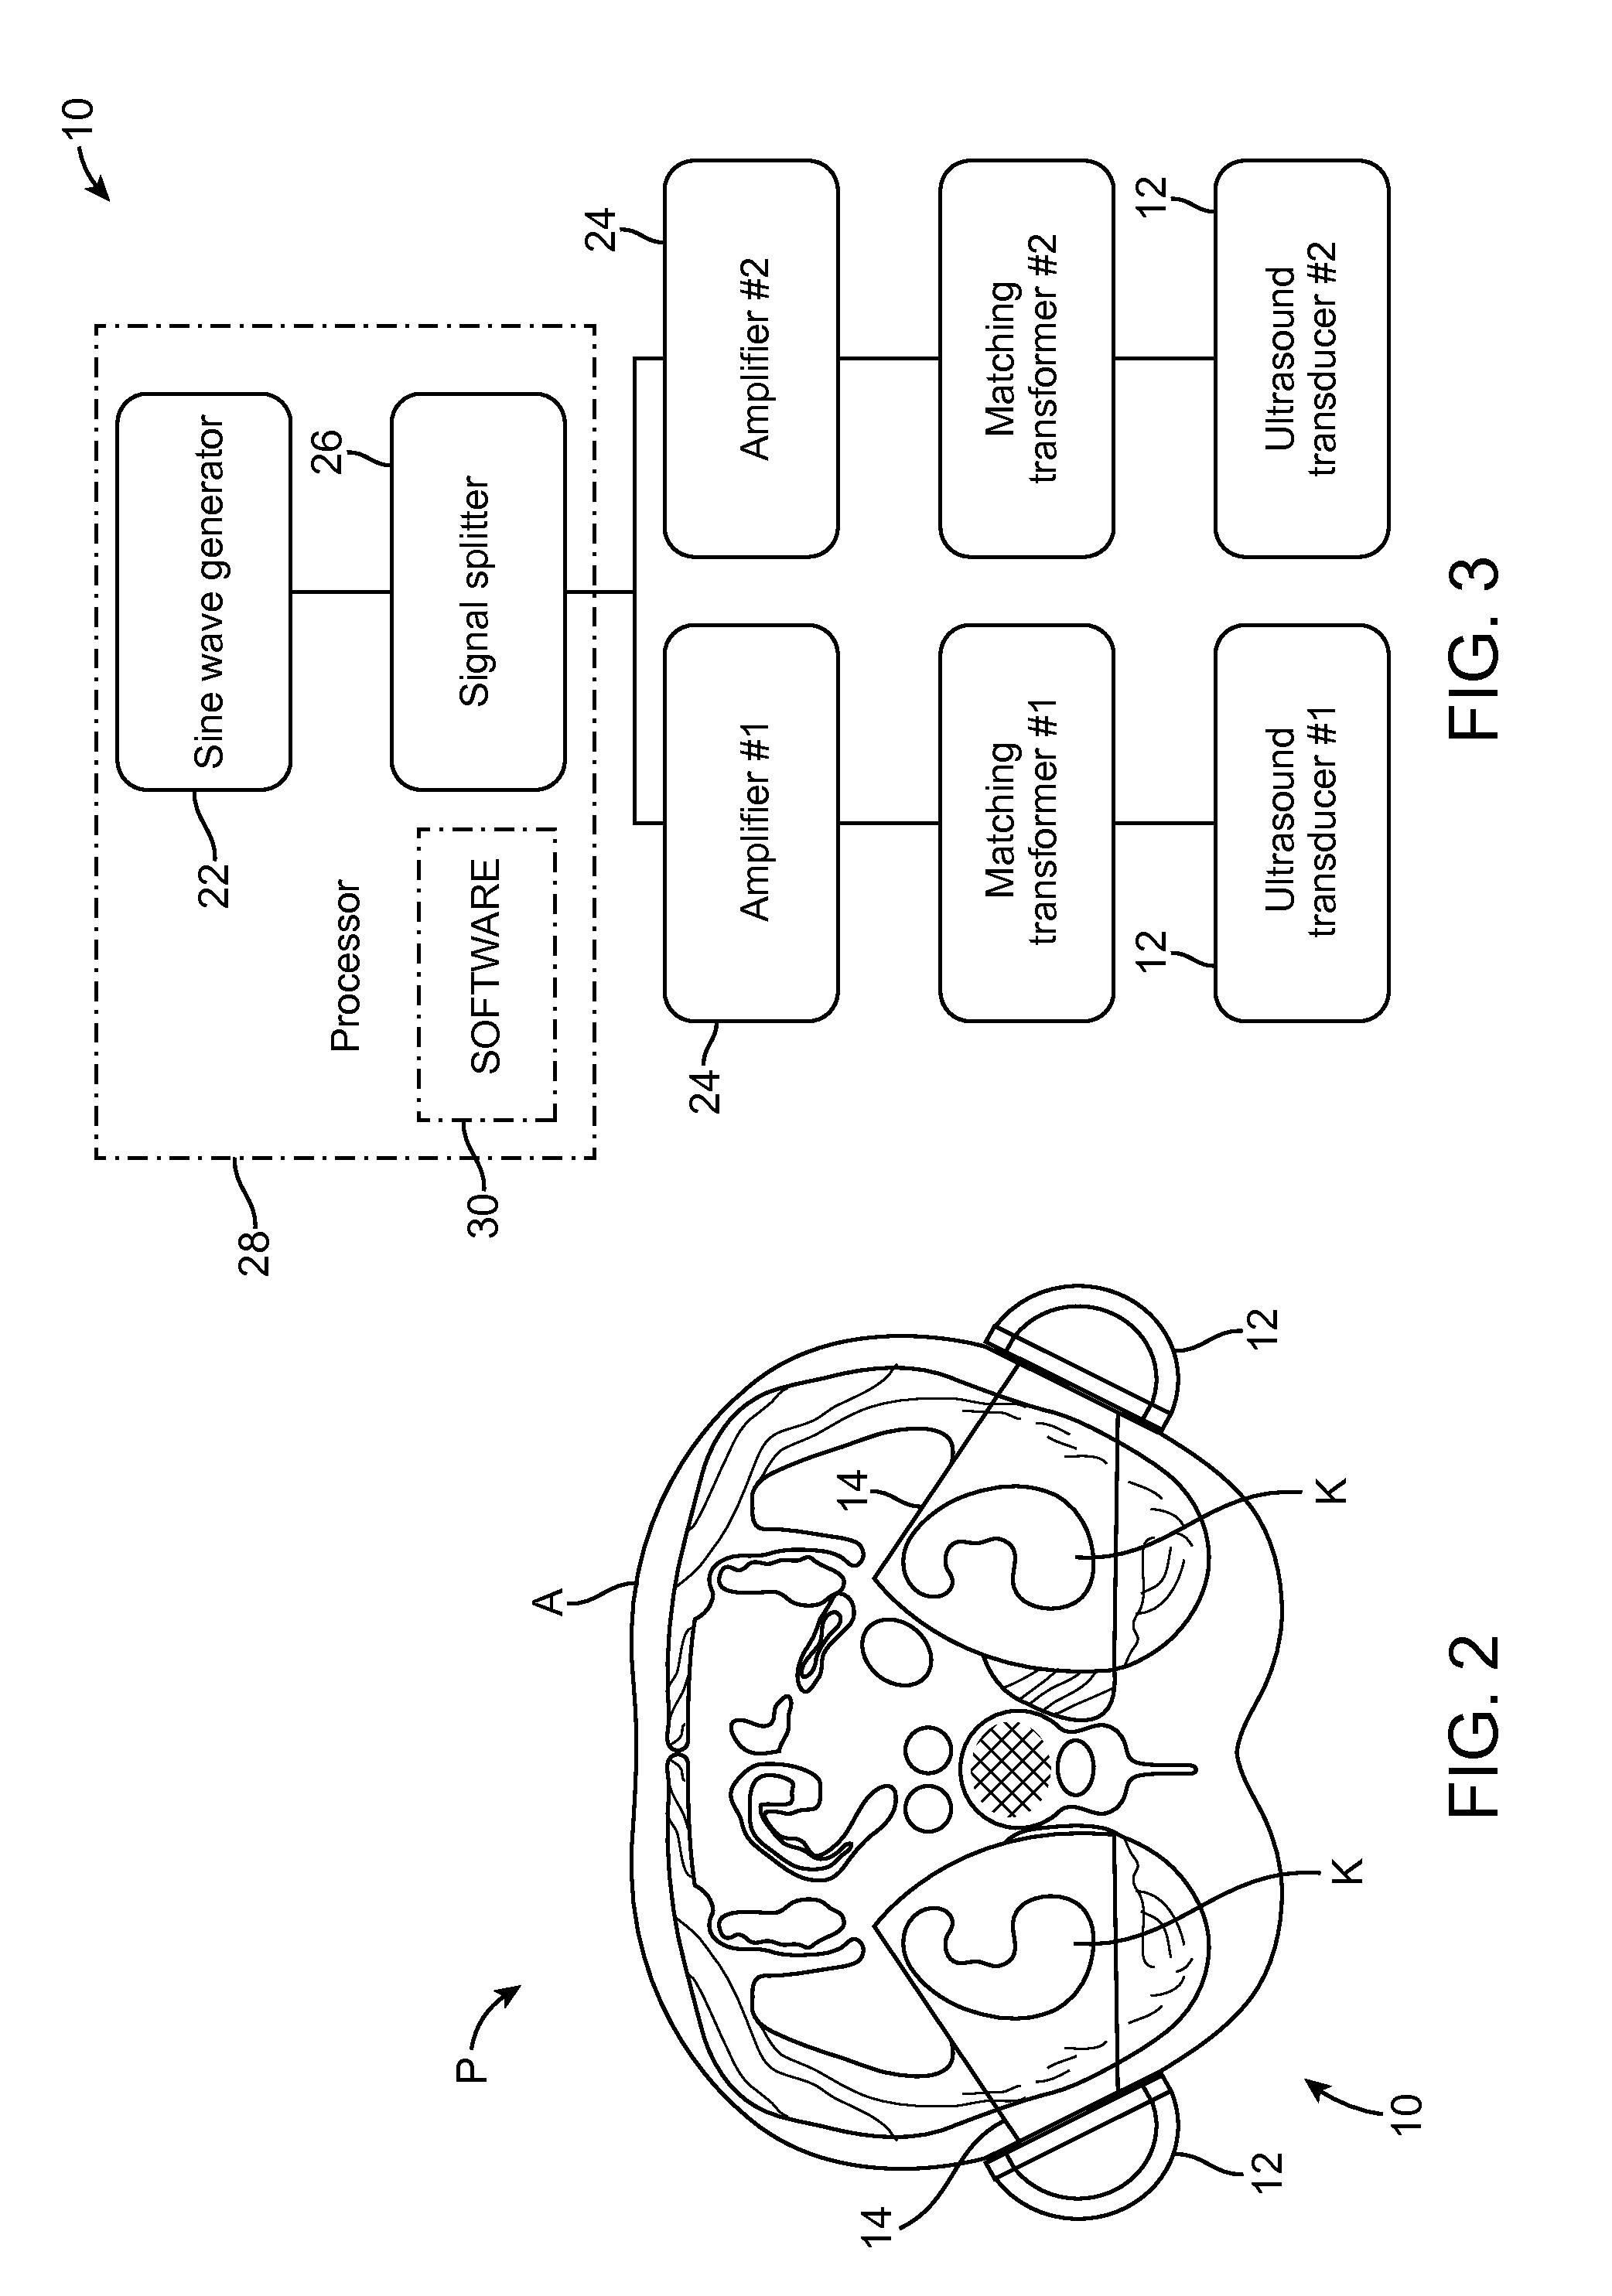 Macro/Micro Duty Cycle Devices, Systems, and Methods Employing Low-Frequency Ultrasound or Other Cyclical Pressure Energies